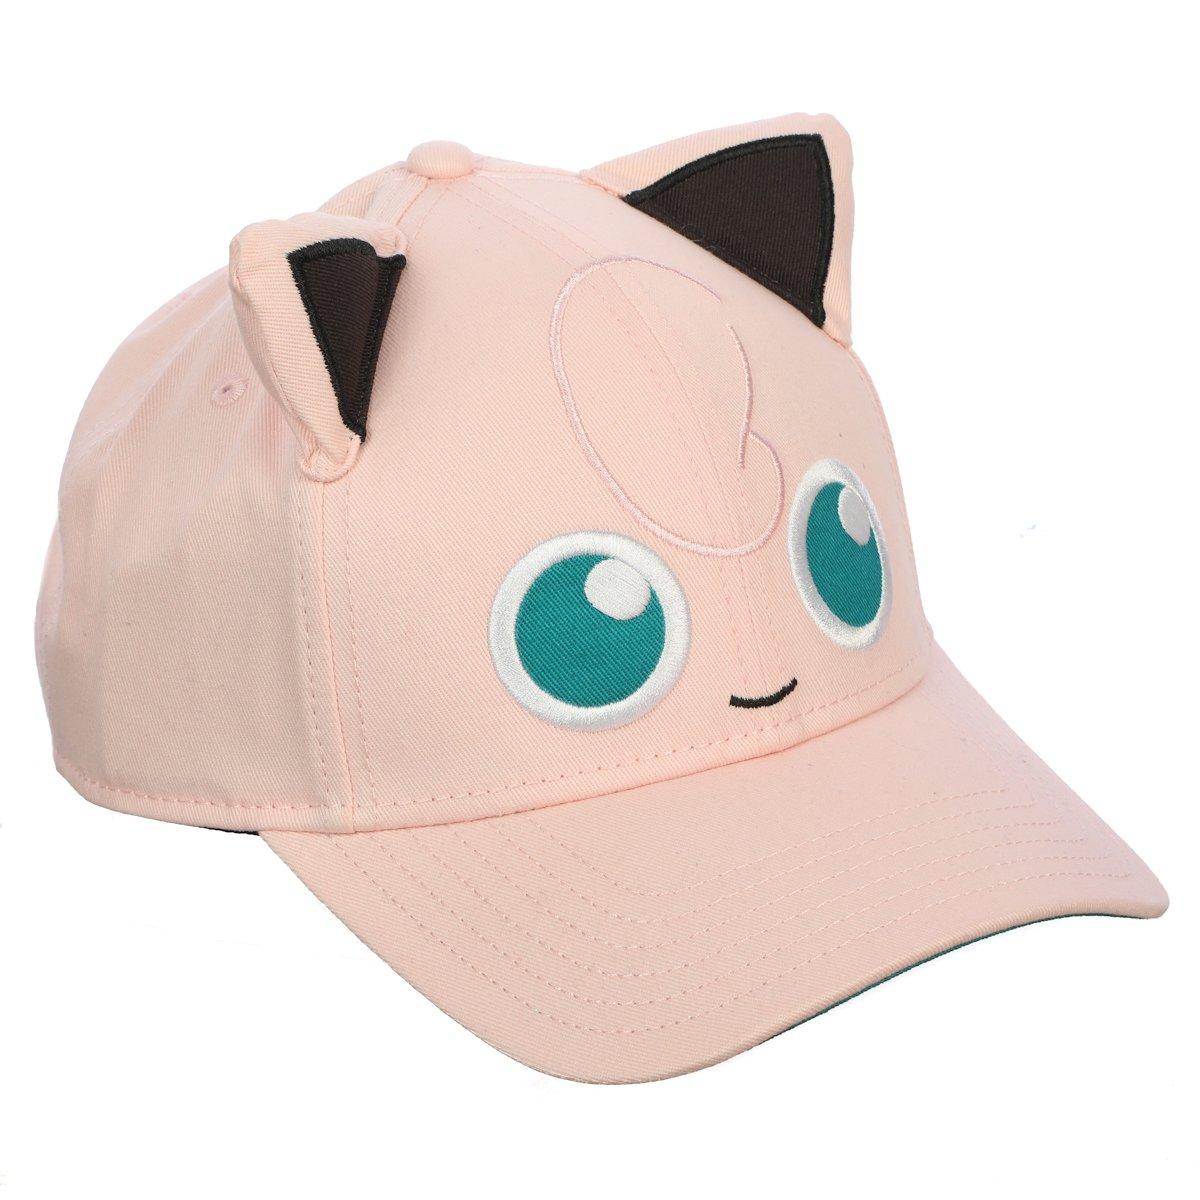 white cat ear cap - ive been trying to find this cap and i keep